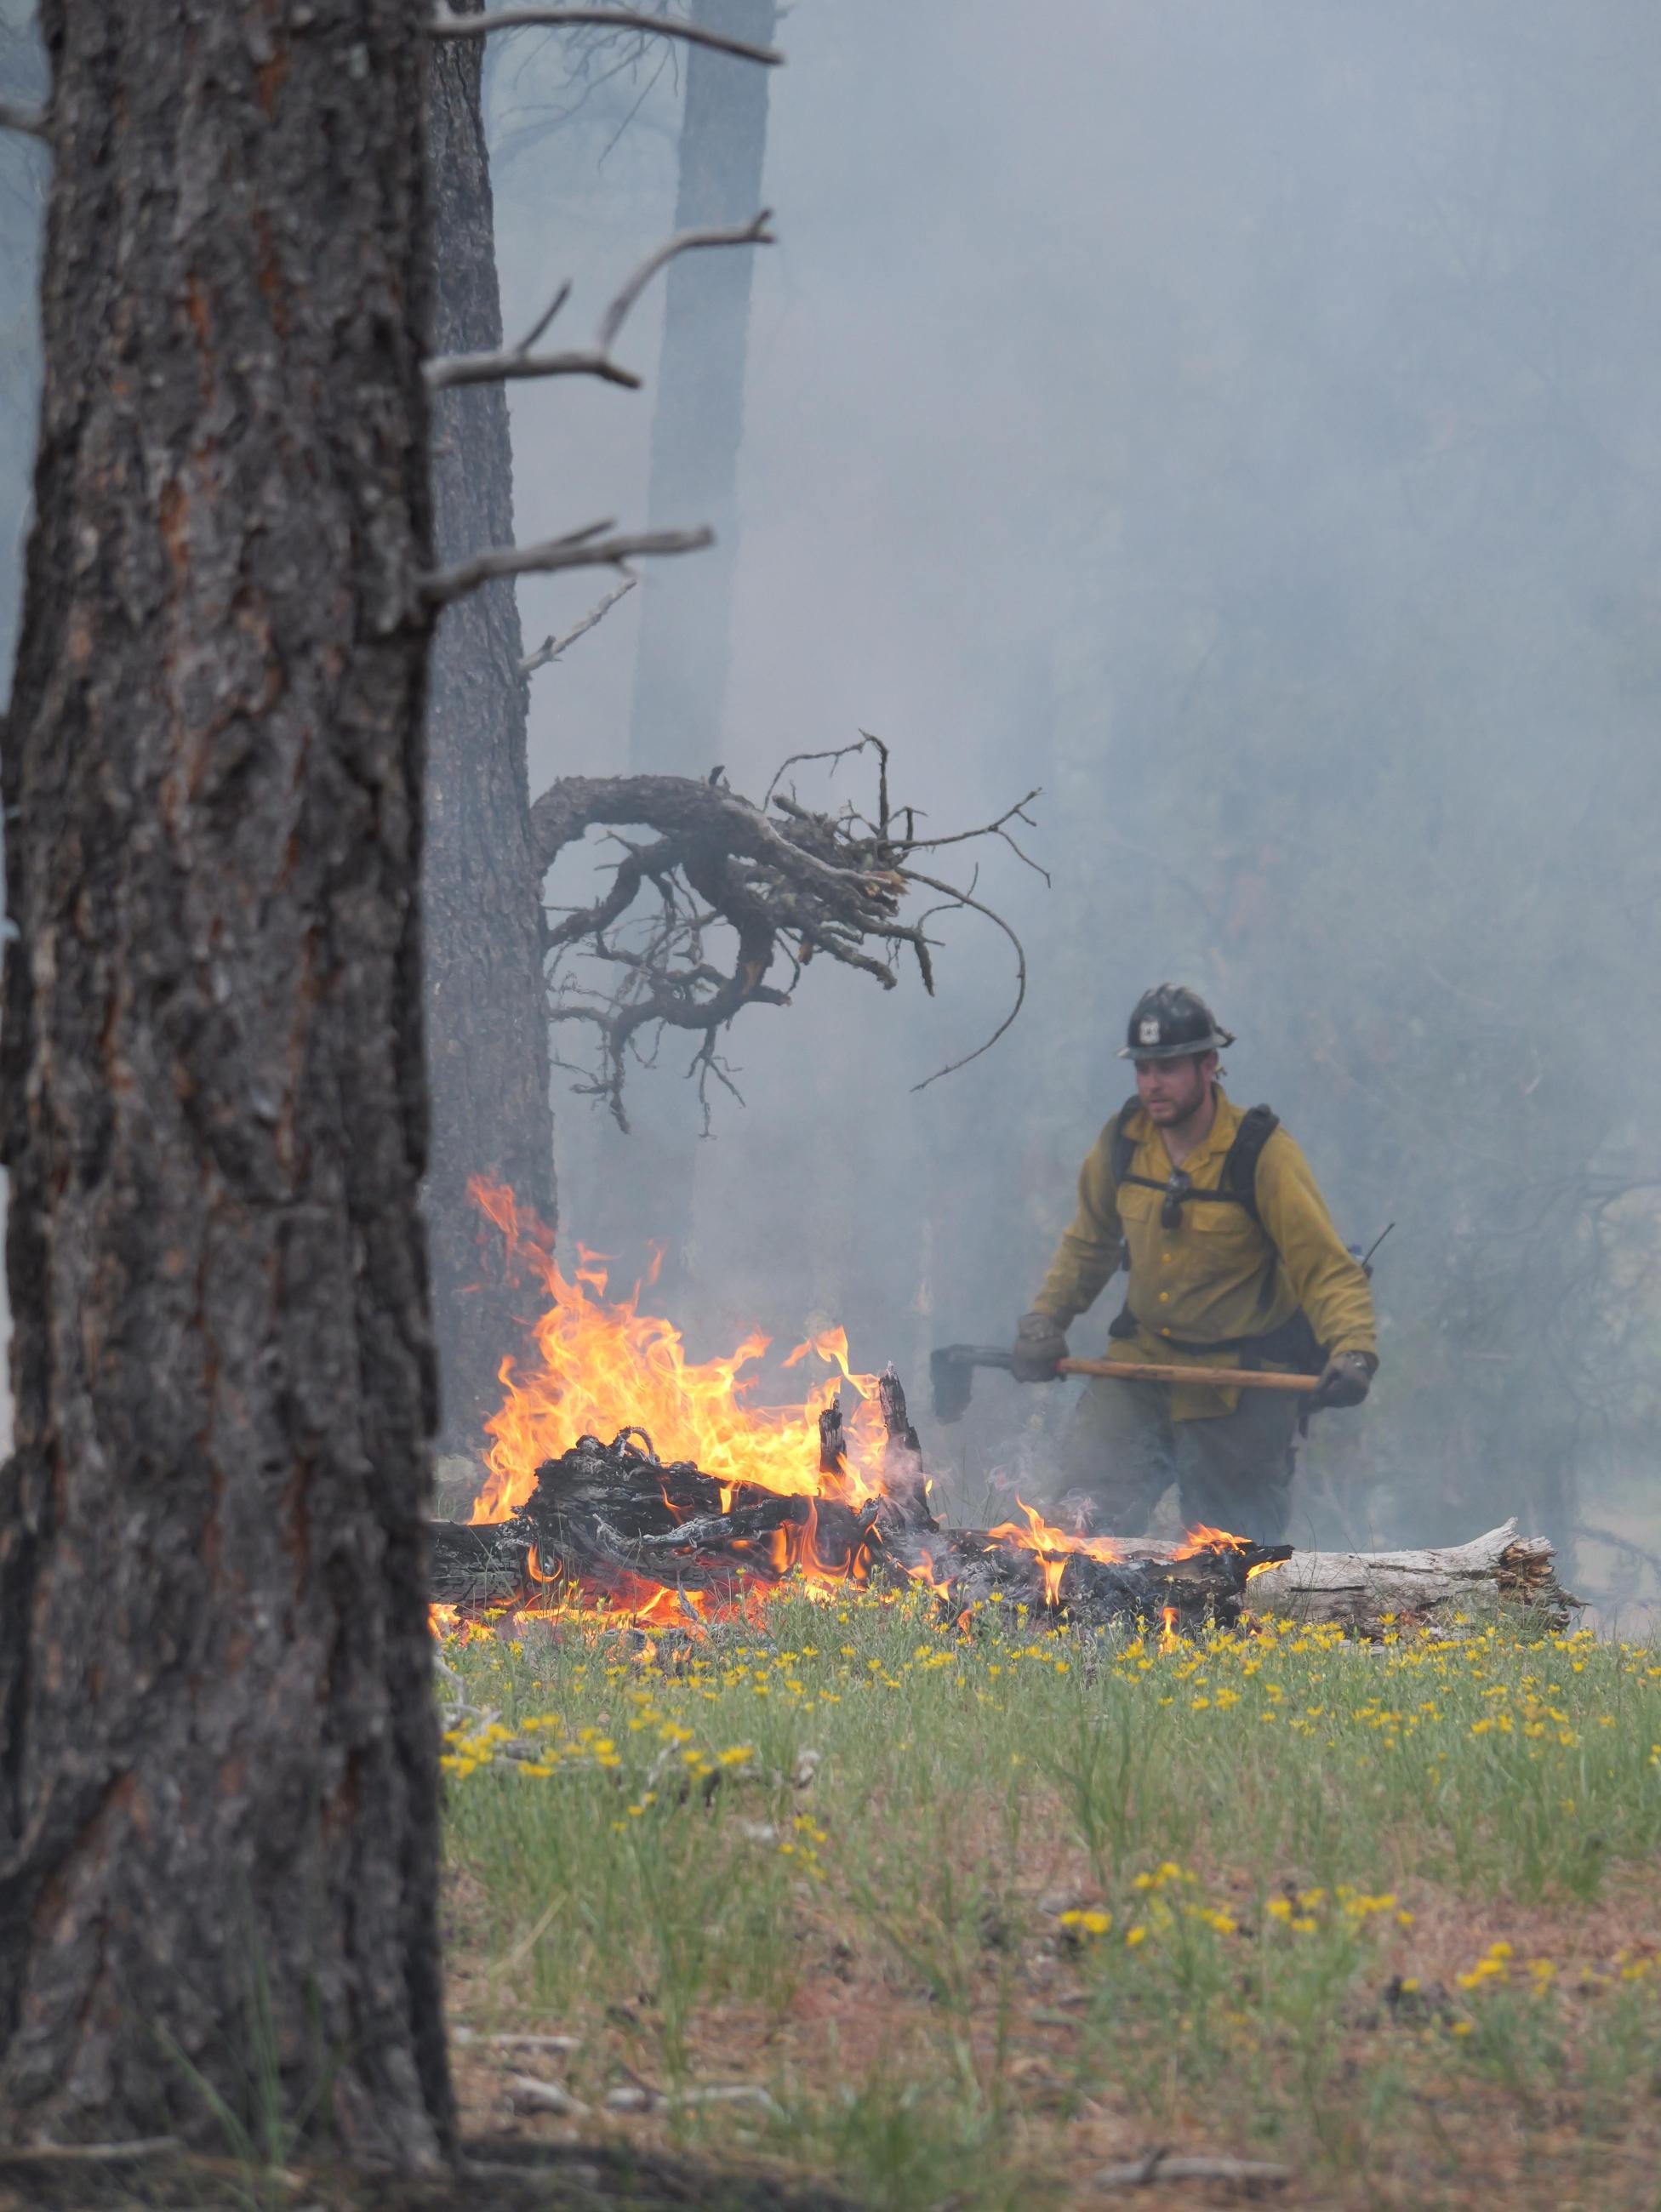 A US Forest Service firefighter holds a tool near a dead log burning in a pine forest.